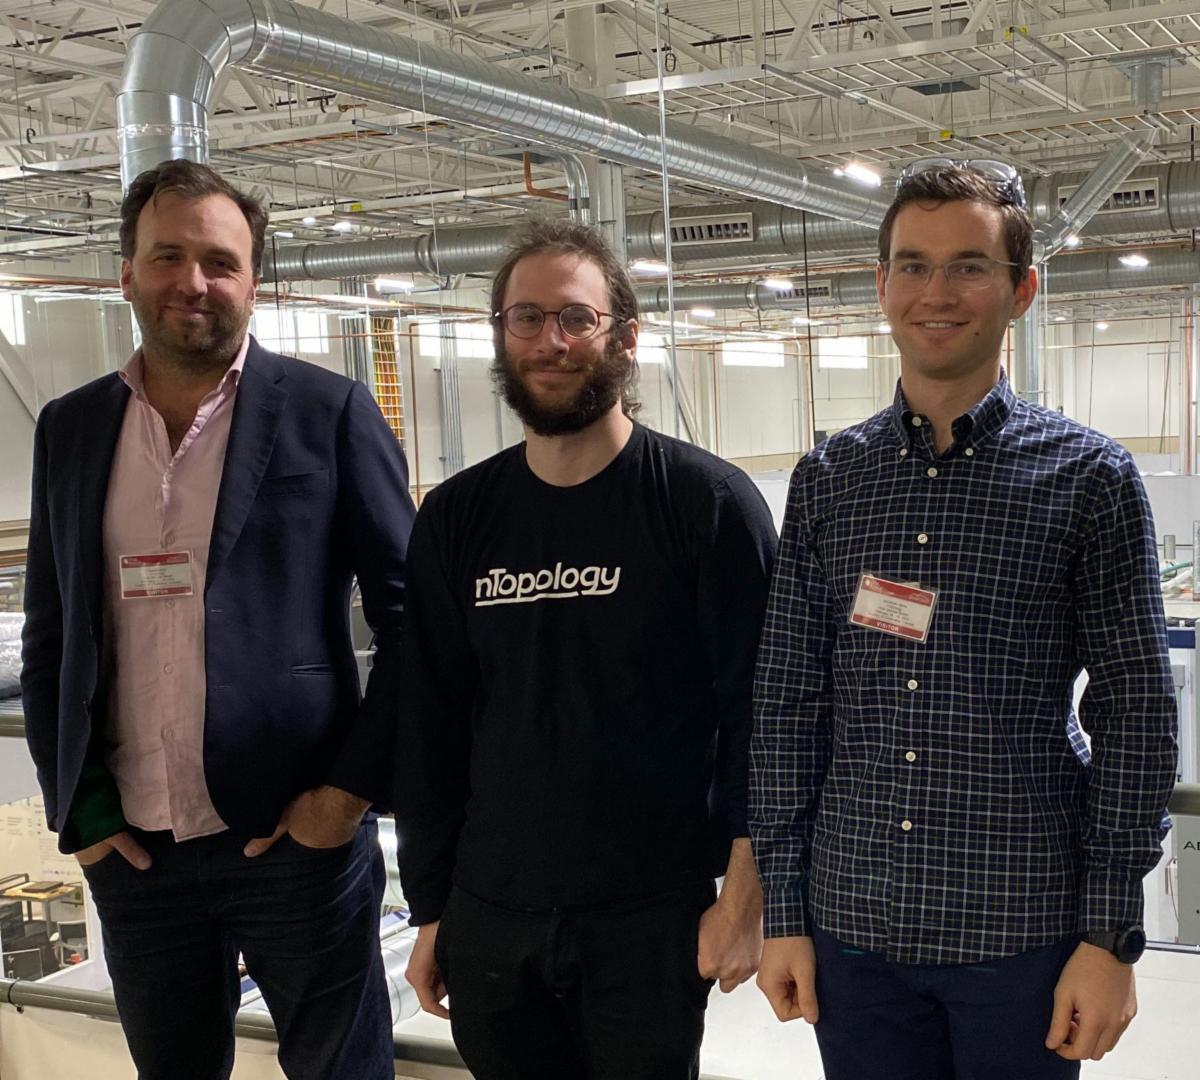 Duann Scott (left), Philip Schiffrin (center) and Jonathan Harris (right), from nTopology, at the Oak Ridge National Laboratory facility to kick off the project. Photo via nTopology.